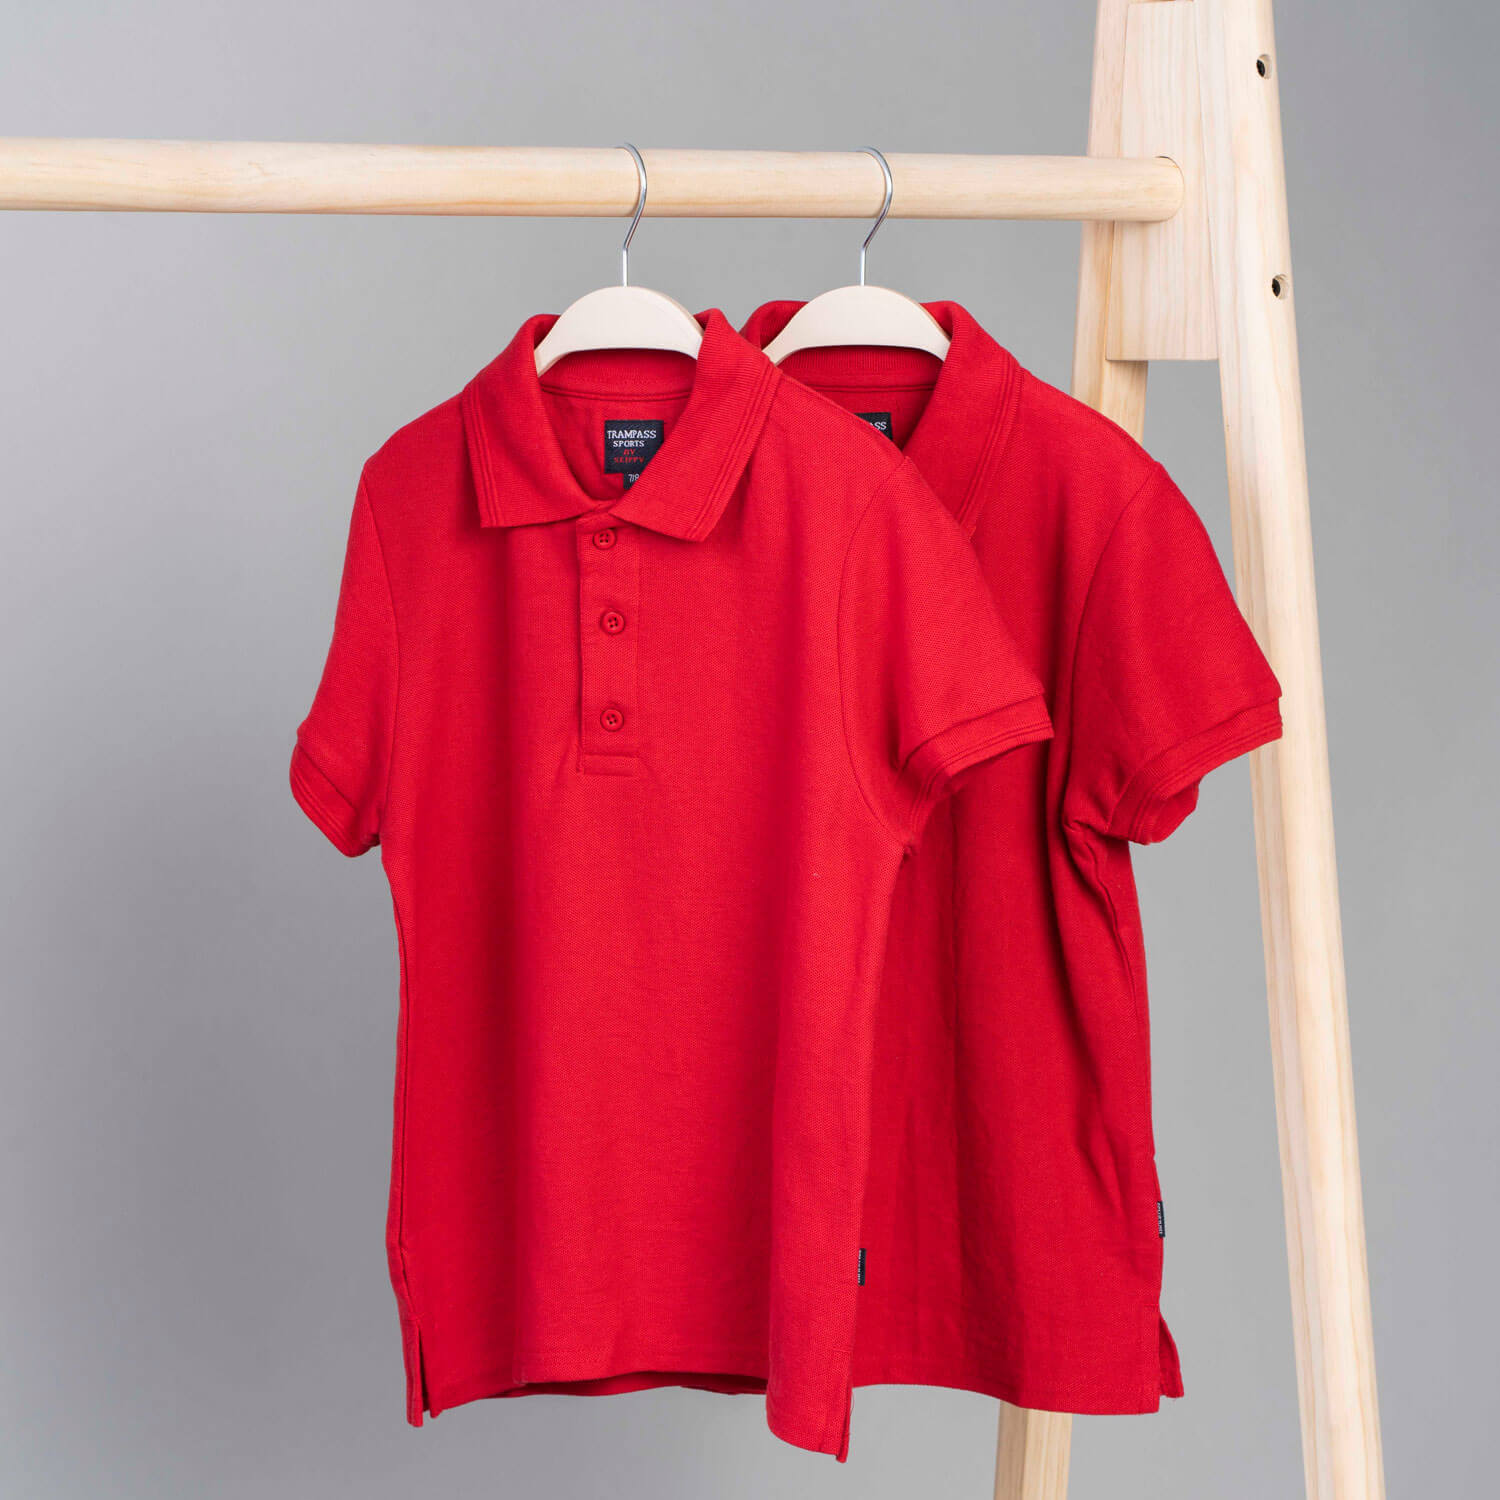 Skippy Short-Sleeve Polo Top 2 Pack - Red 1 Shaws Department Stores